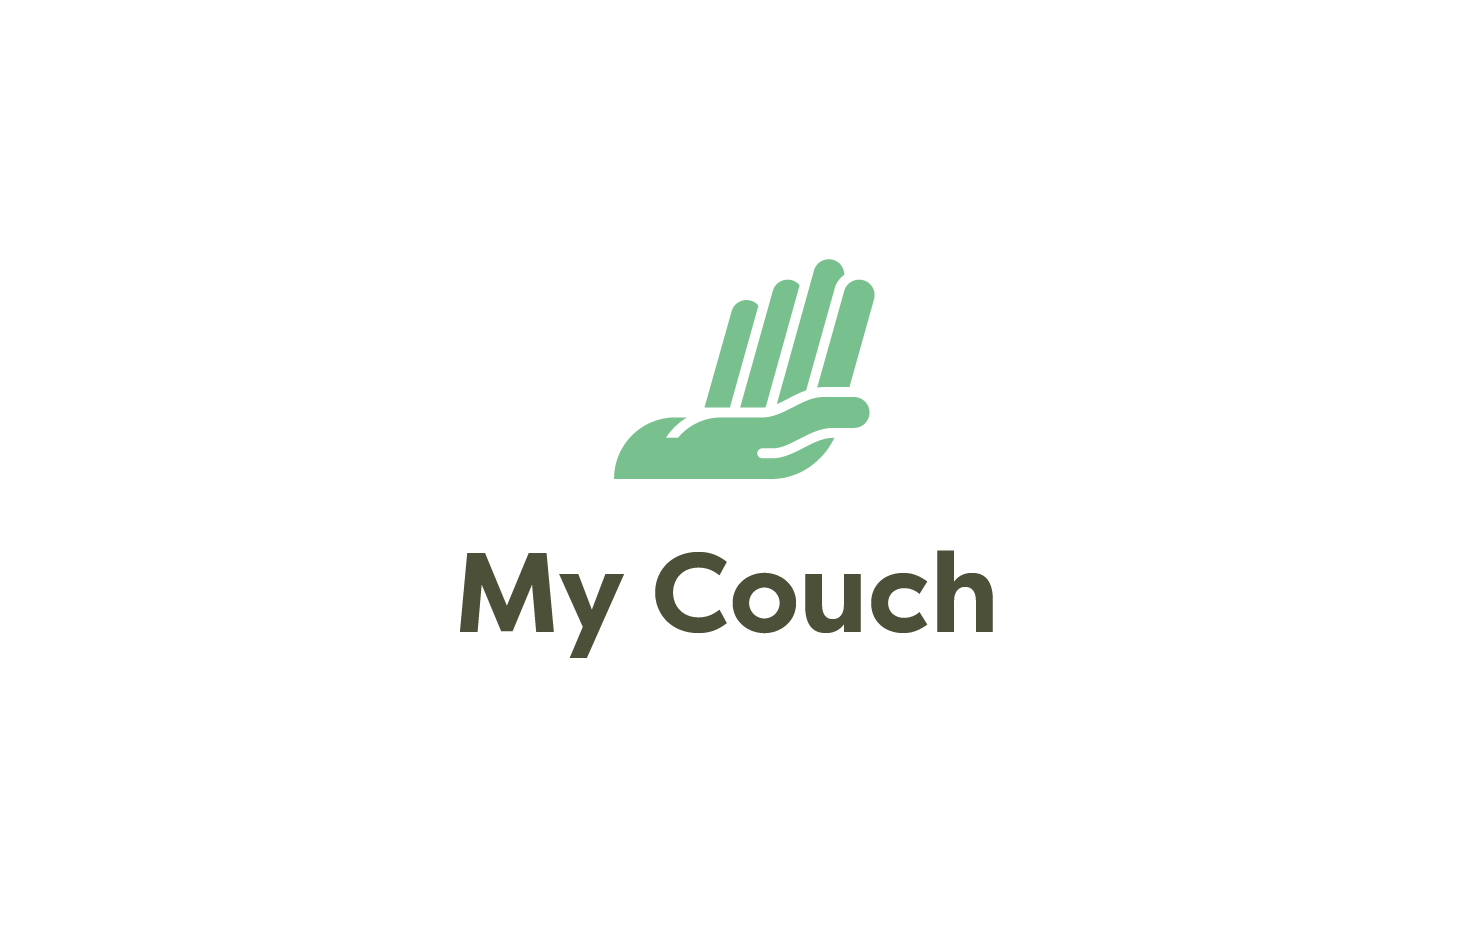 Couch Logo - My Couch